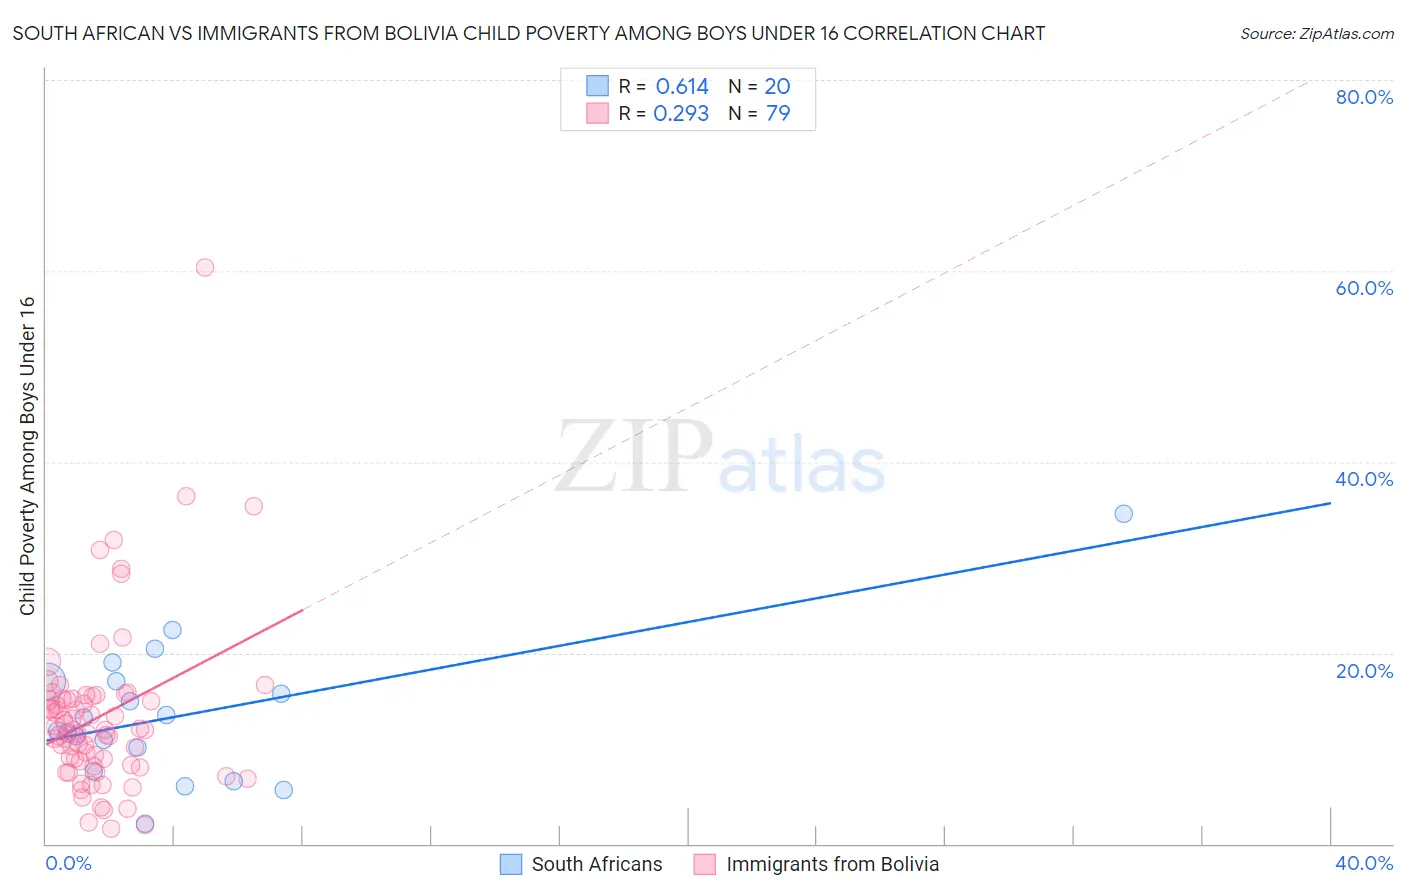 South African vs Immigrants from Bolivia Child Poverty Among Boys Under 16